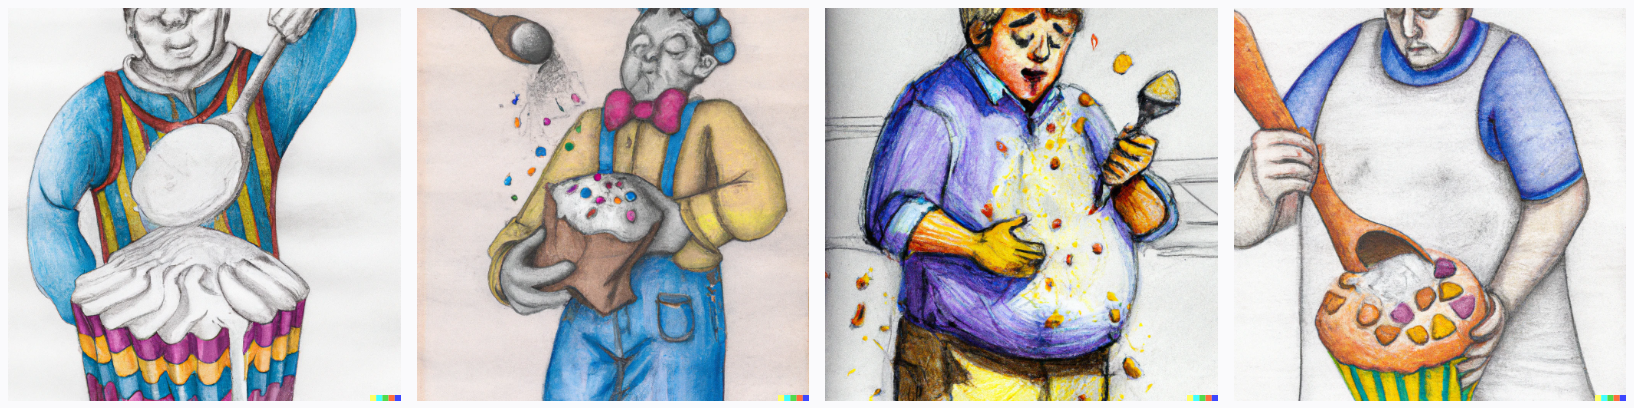 muffin man dumping flour inside of his shirt while holding an oversized spoon colored pencil detailed